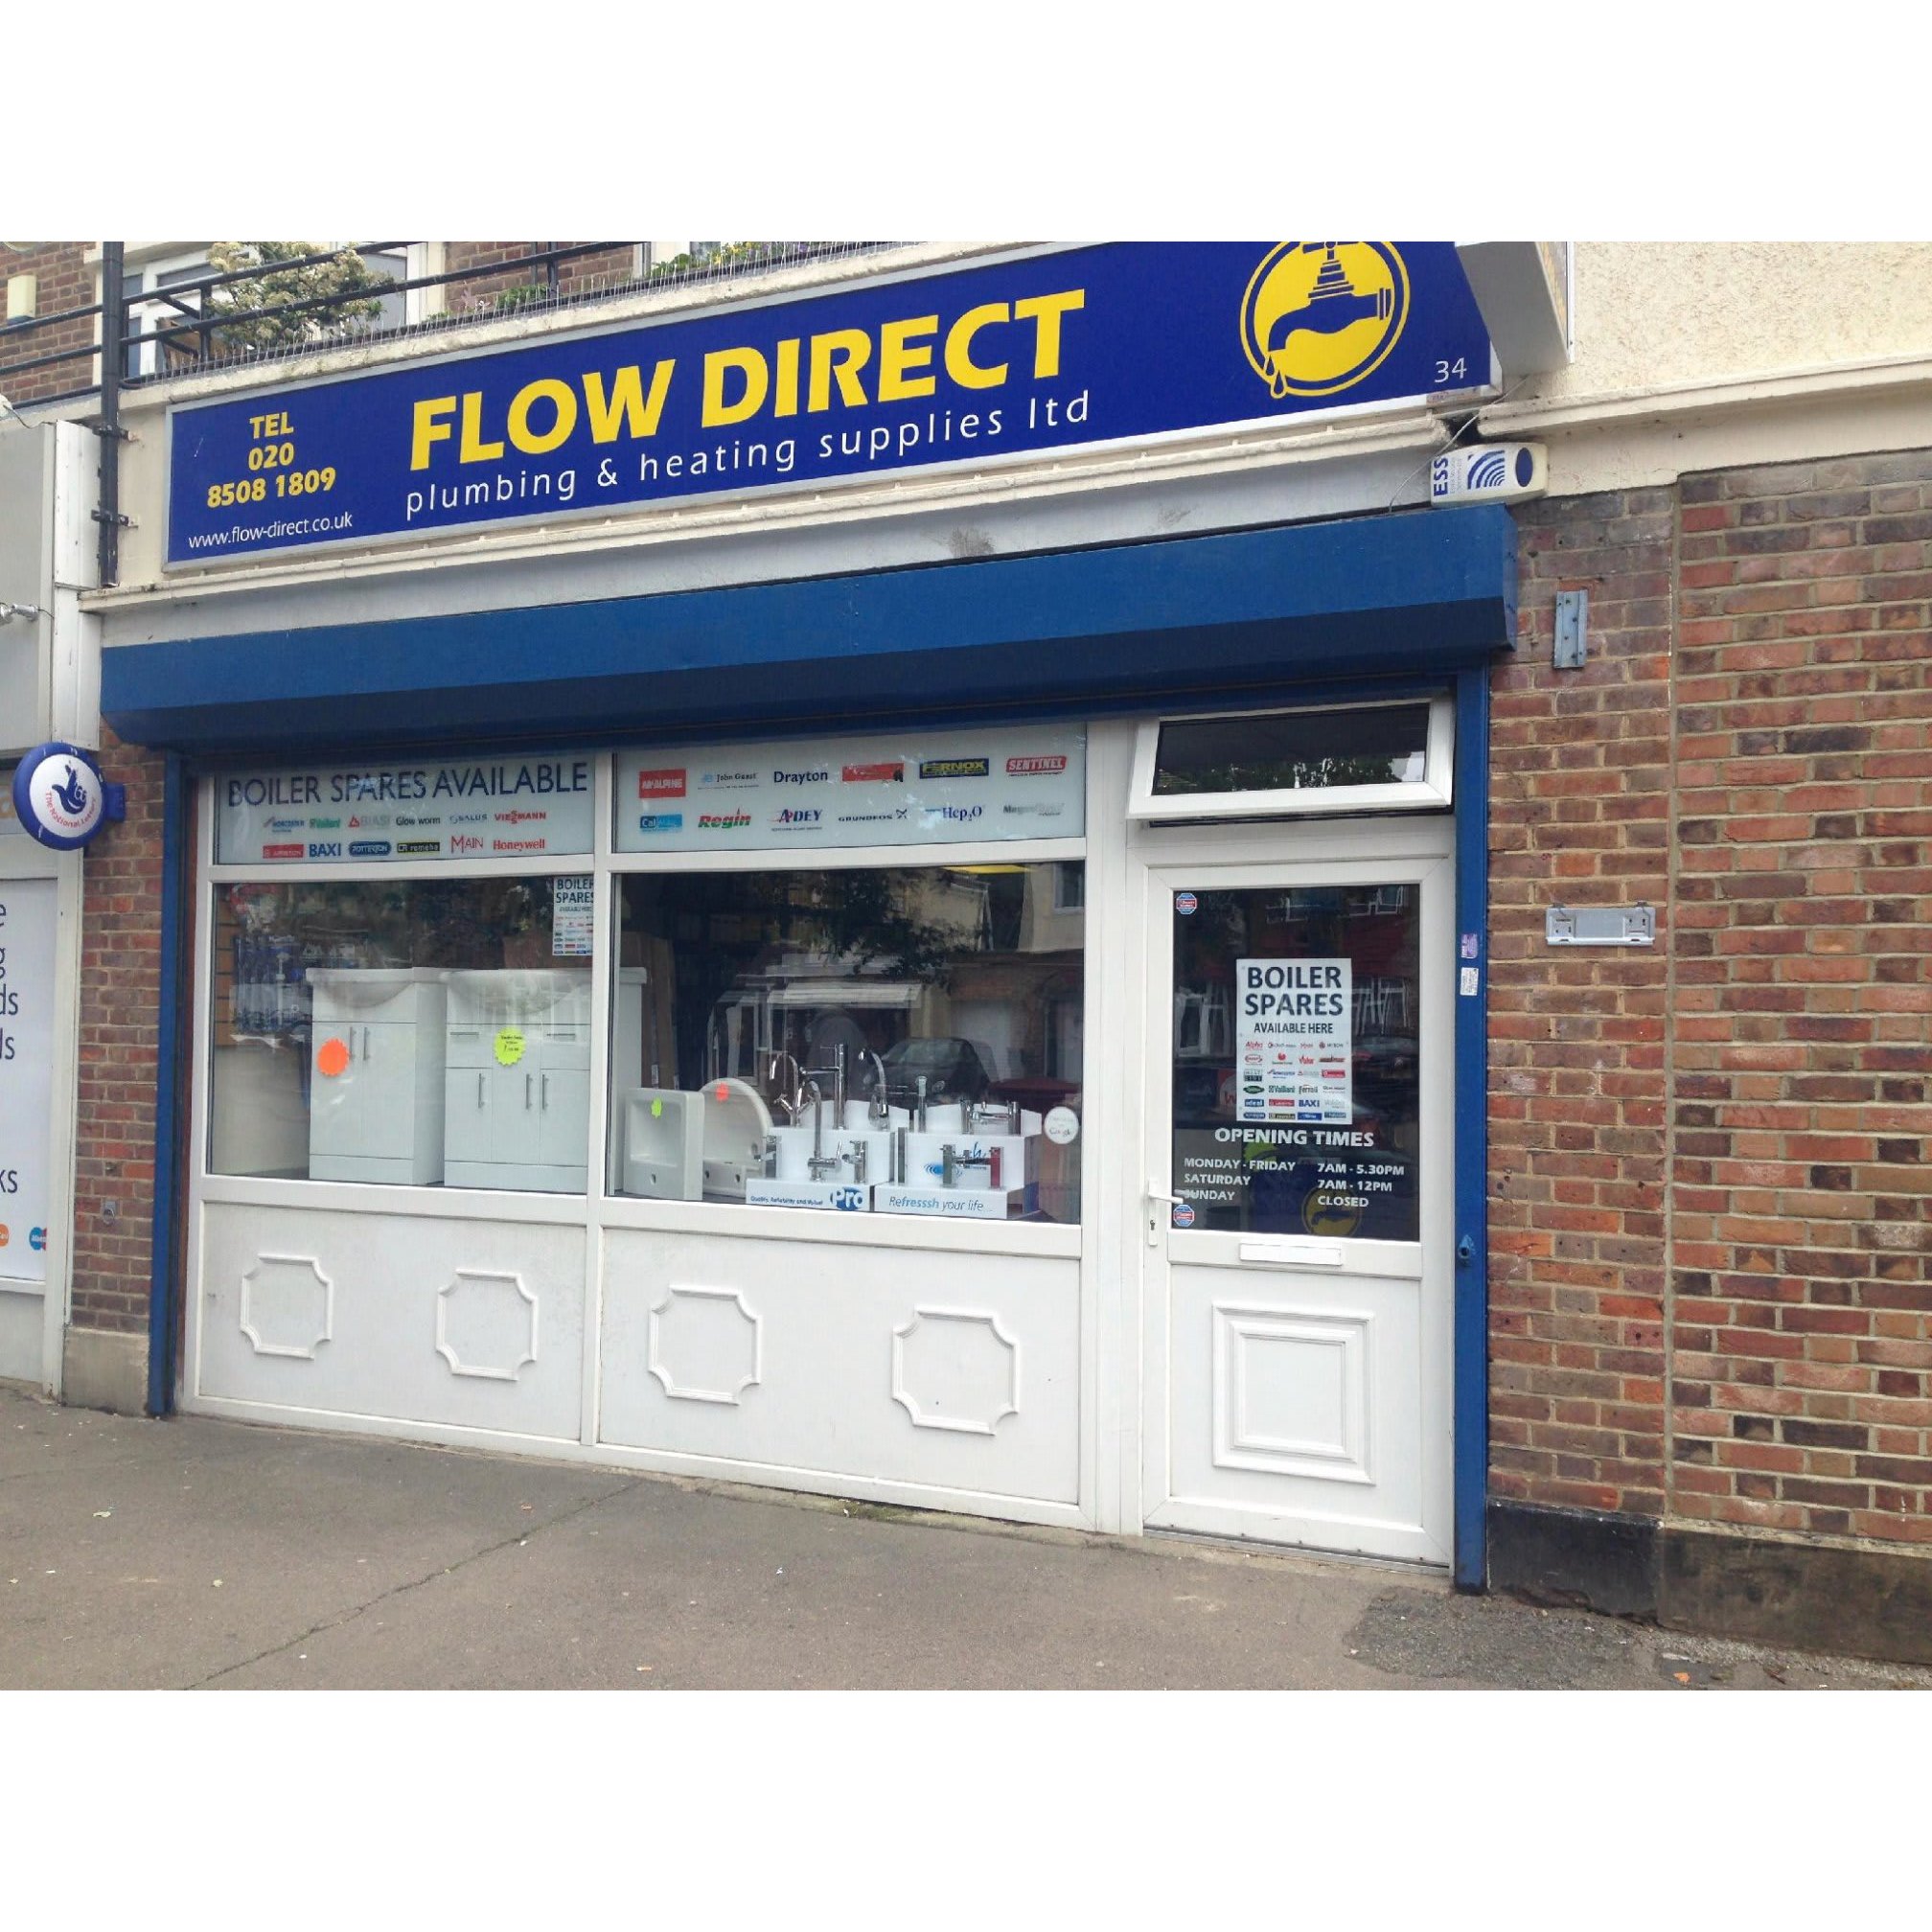 Flow Direct Plumbing & Heating - Loughton, Essex IG10 2NN - 020 8508 1809 | ShowMeLocal.com